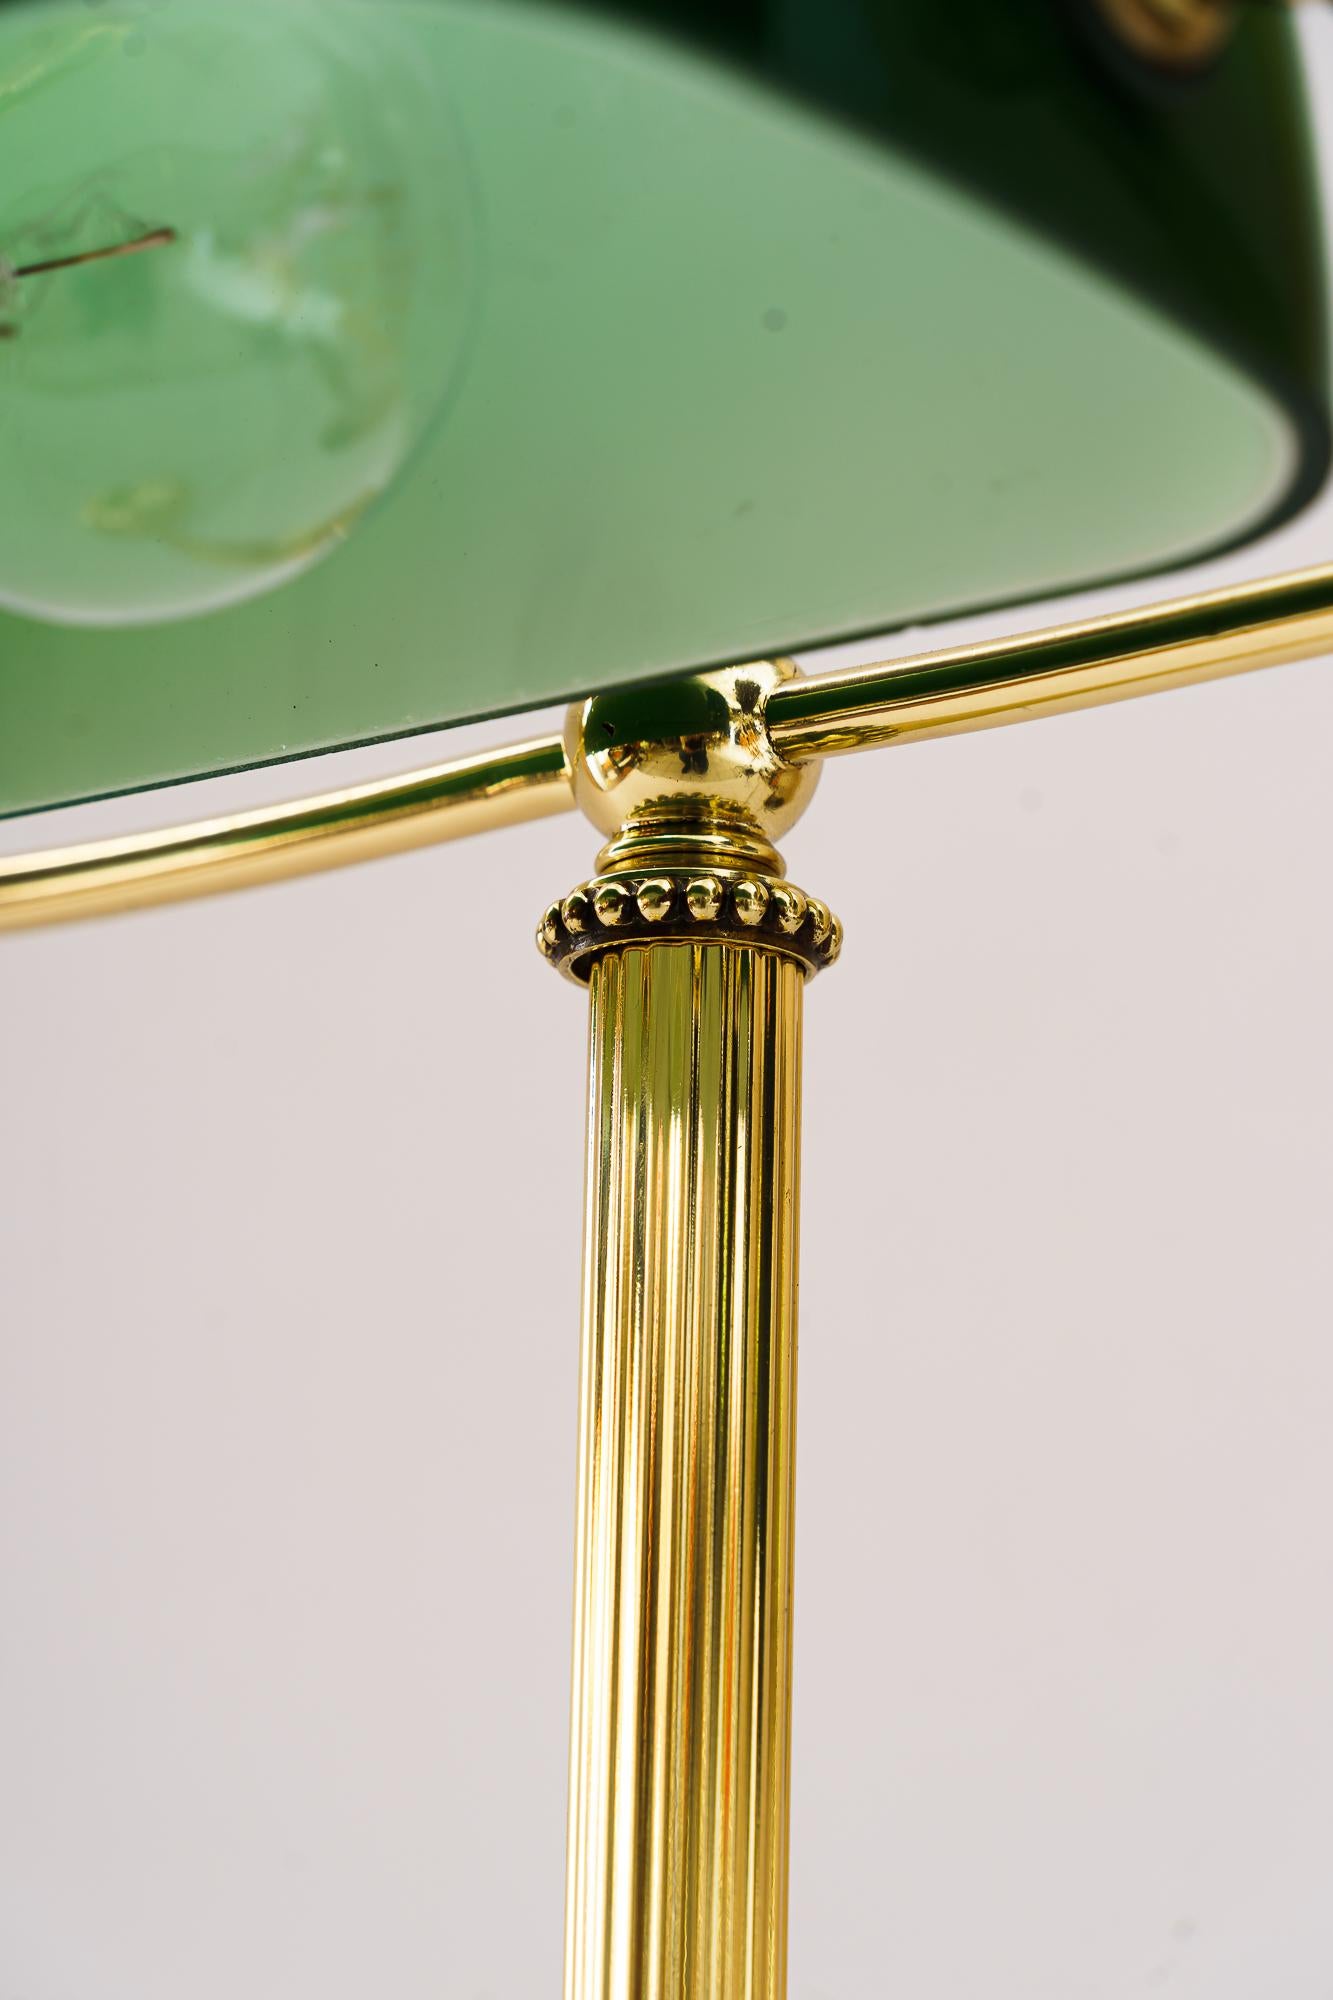 Lacquered Art Deco Banker Lamp with Green Glass Shade, Vienna, Around 1920s